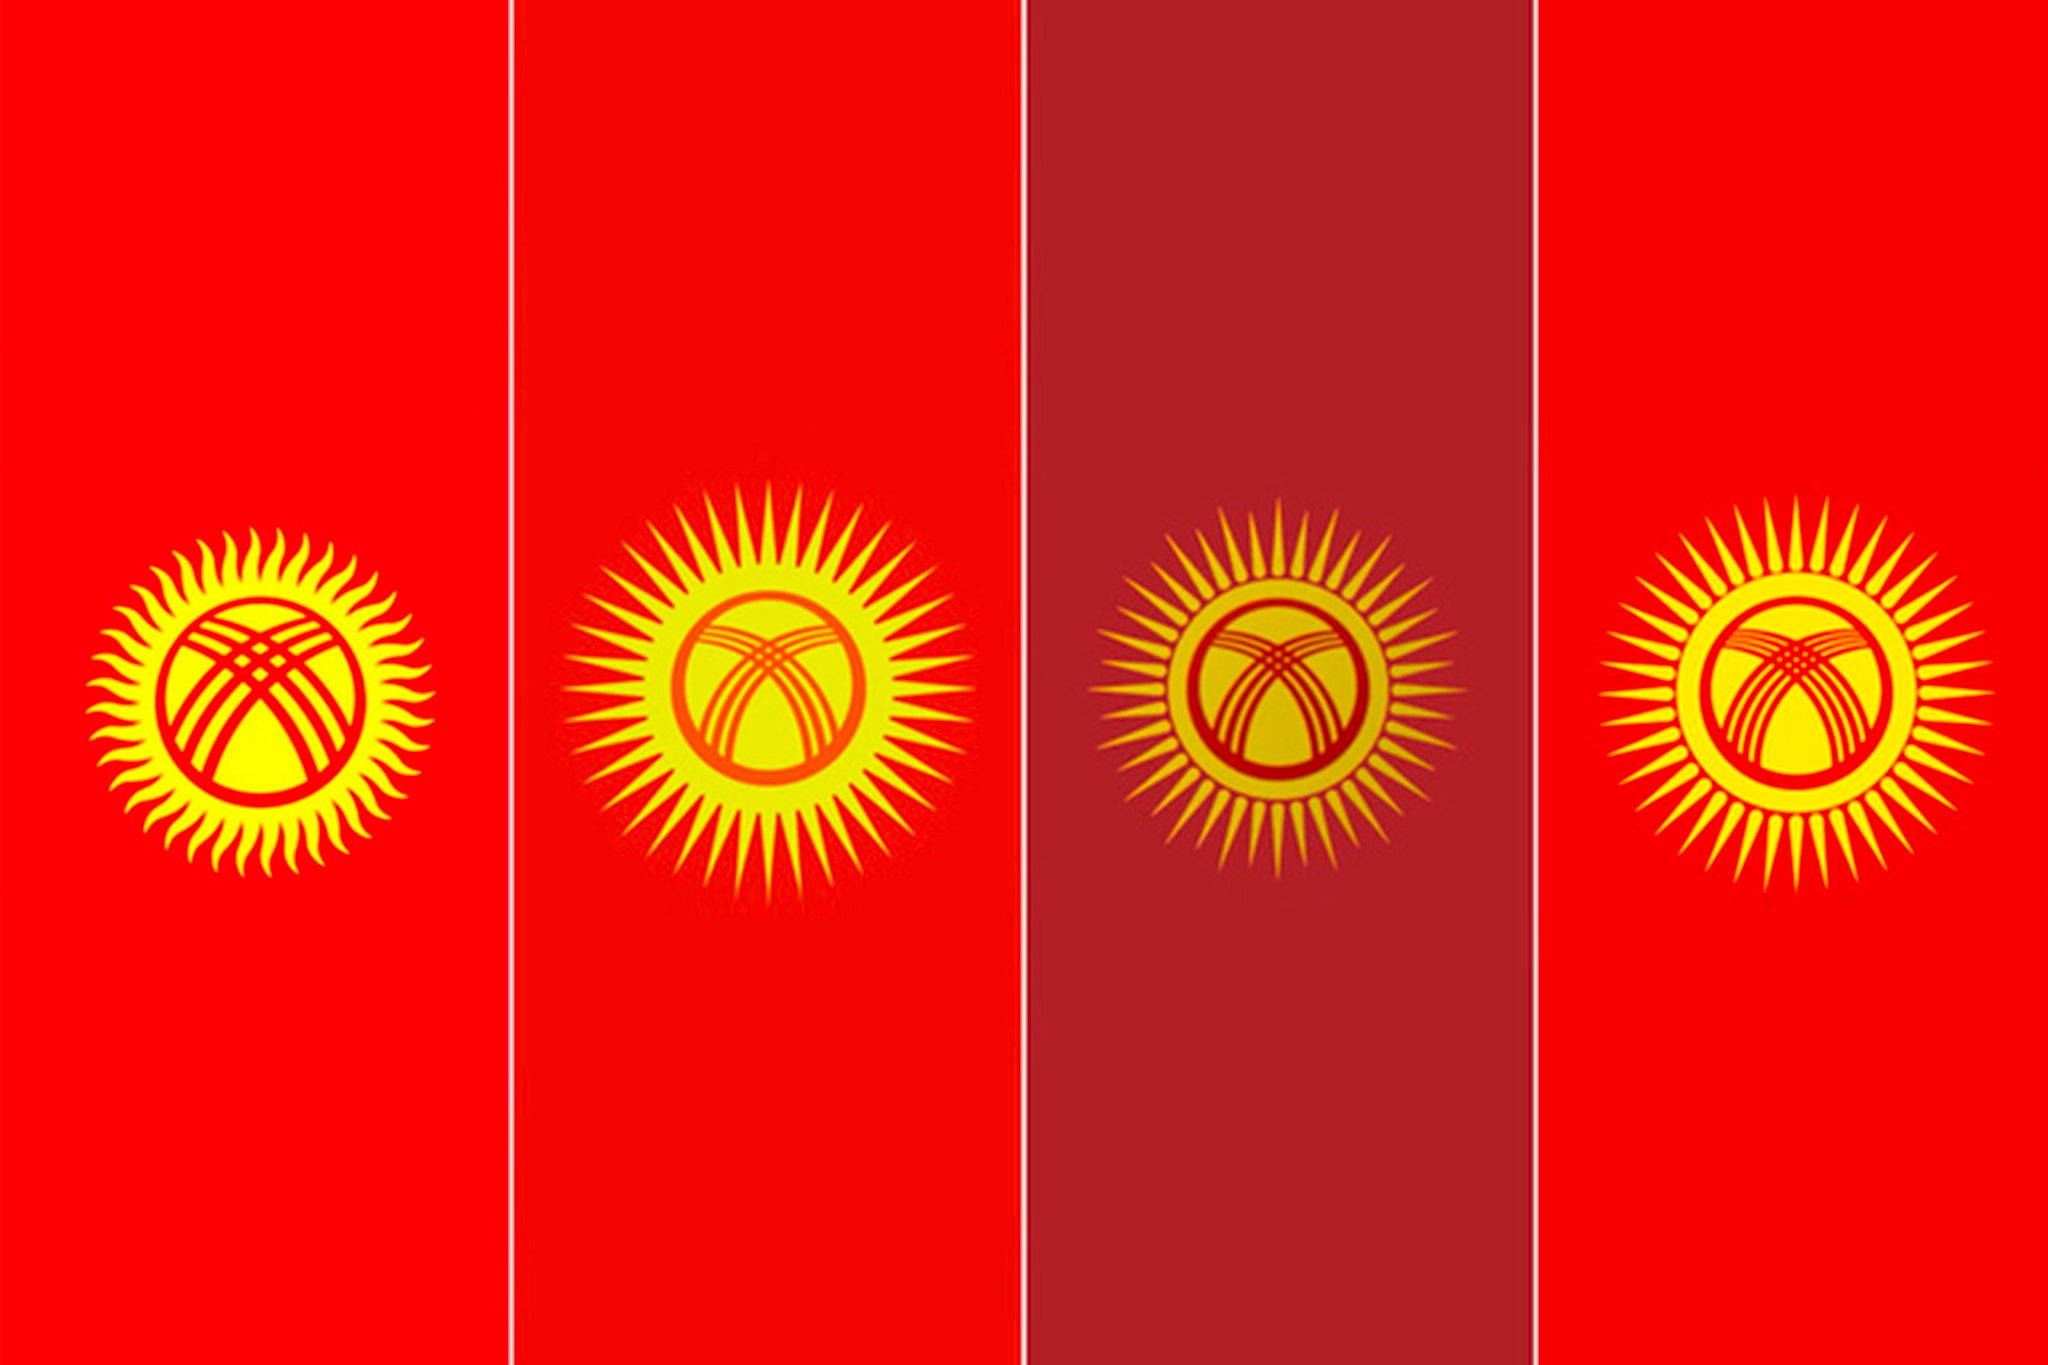 The flag Kyrgyzstan (first from left), and ones proposed by MPs